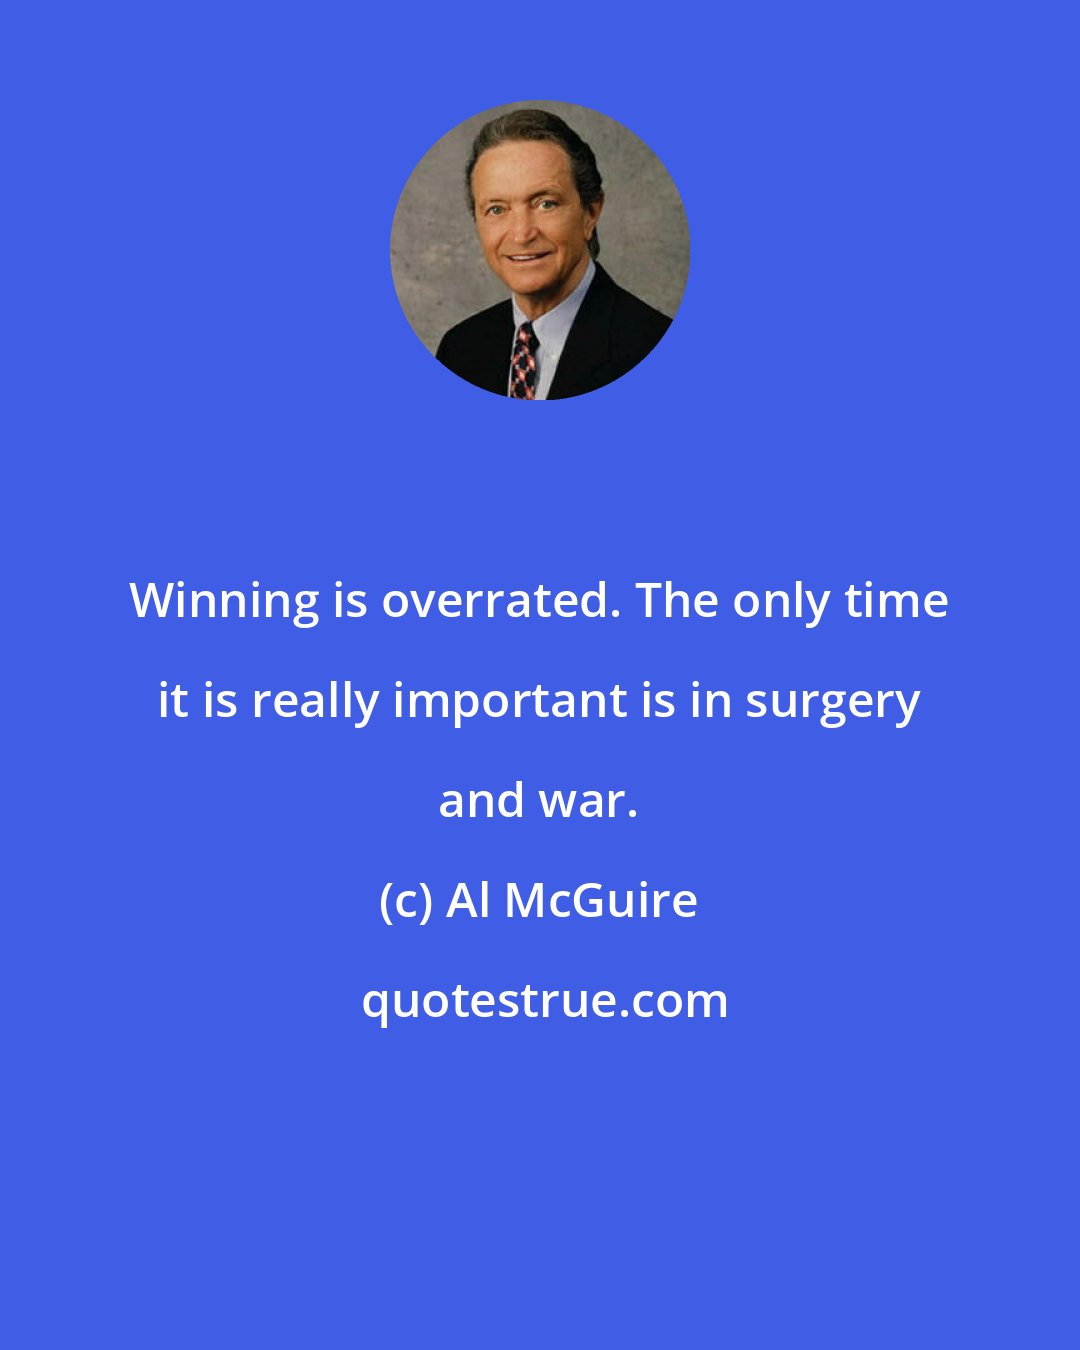 Al McGuire: Winning is overrated. The only time it is really important is in surgery and war.